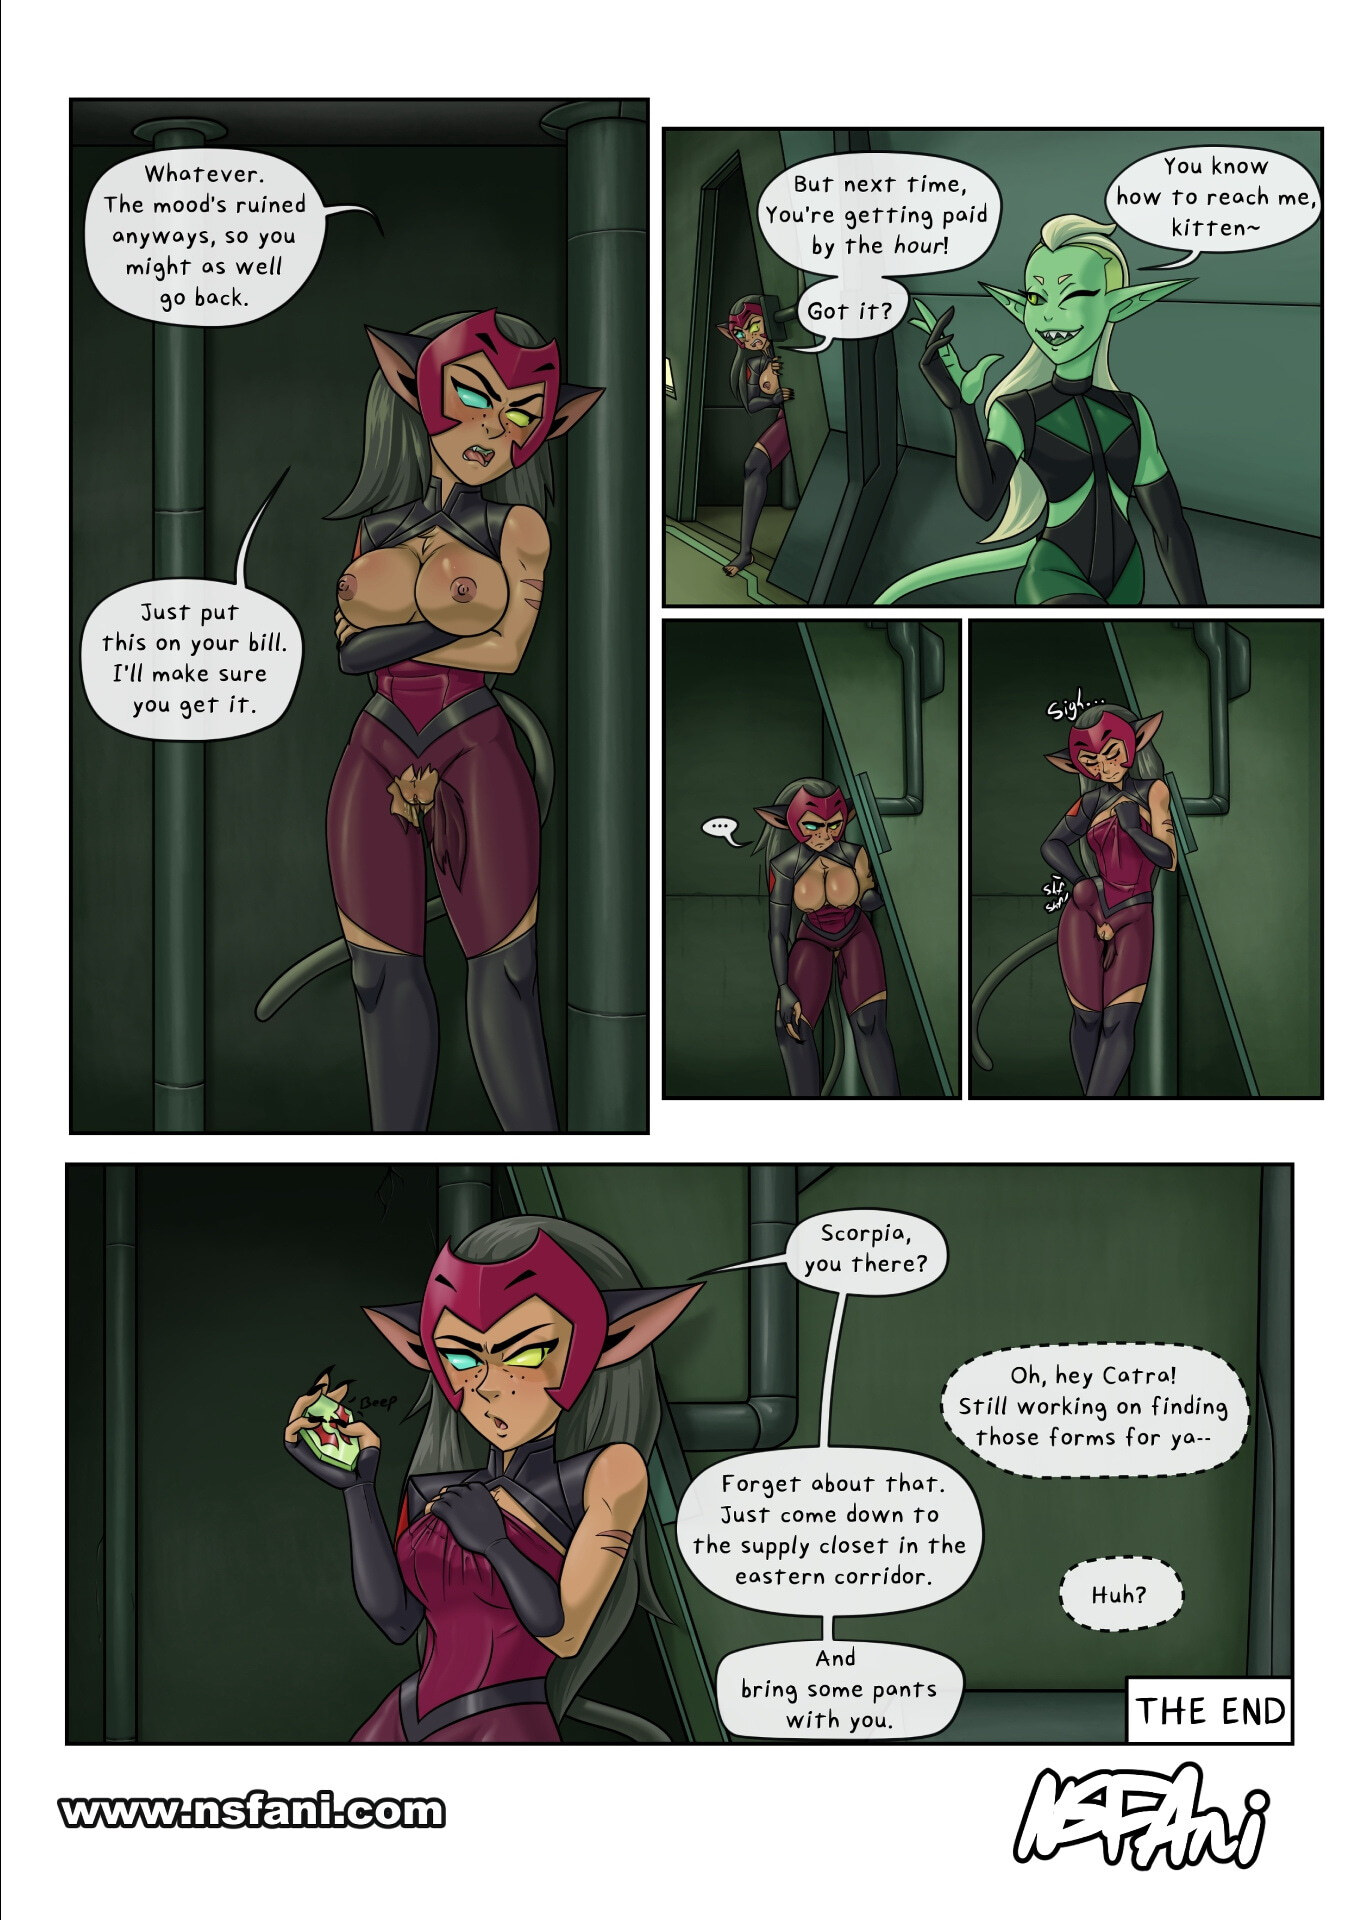 Scratching the Itch - Page 9